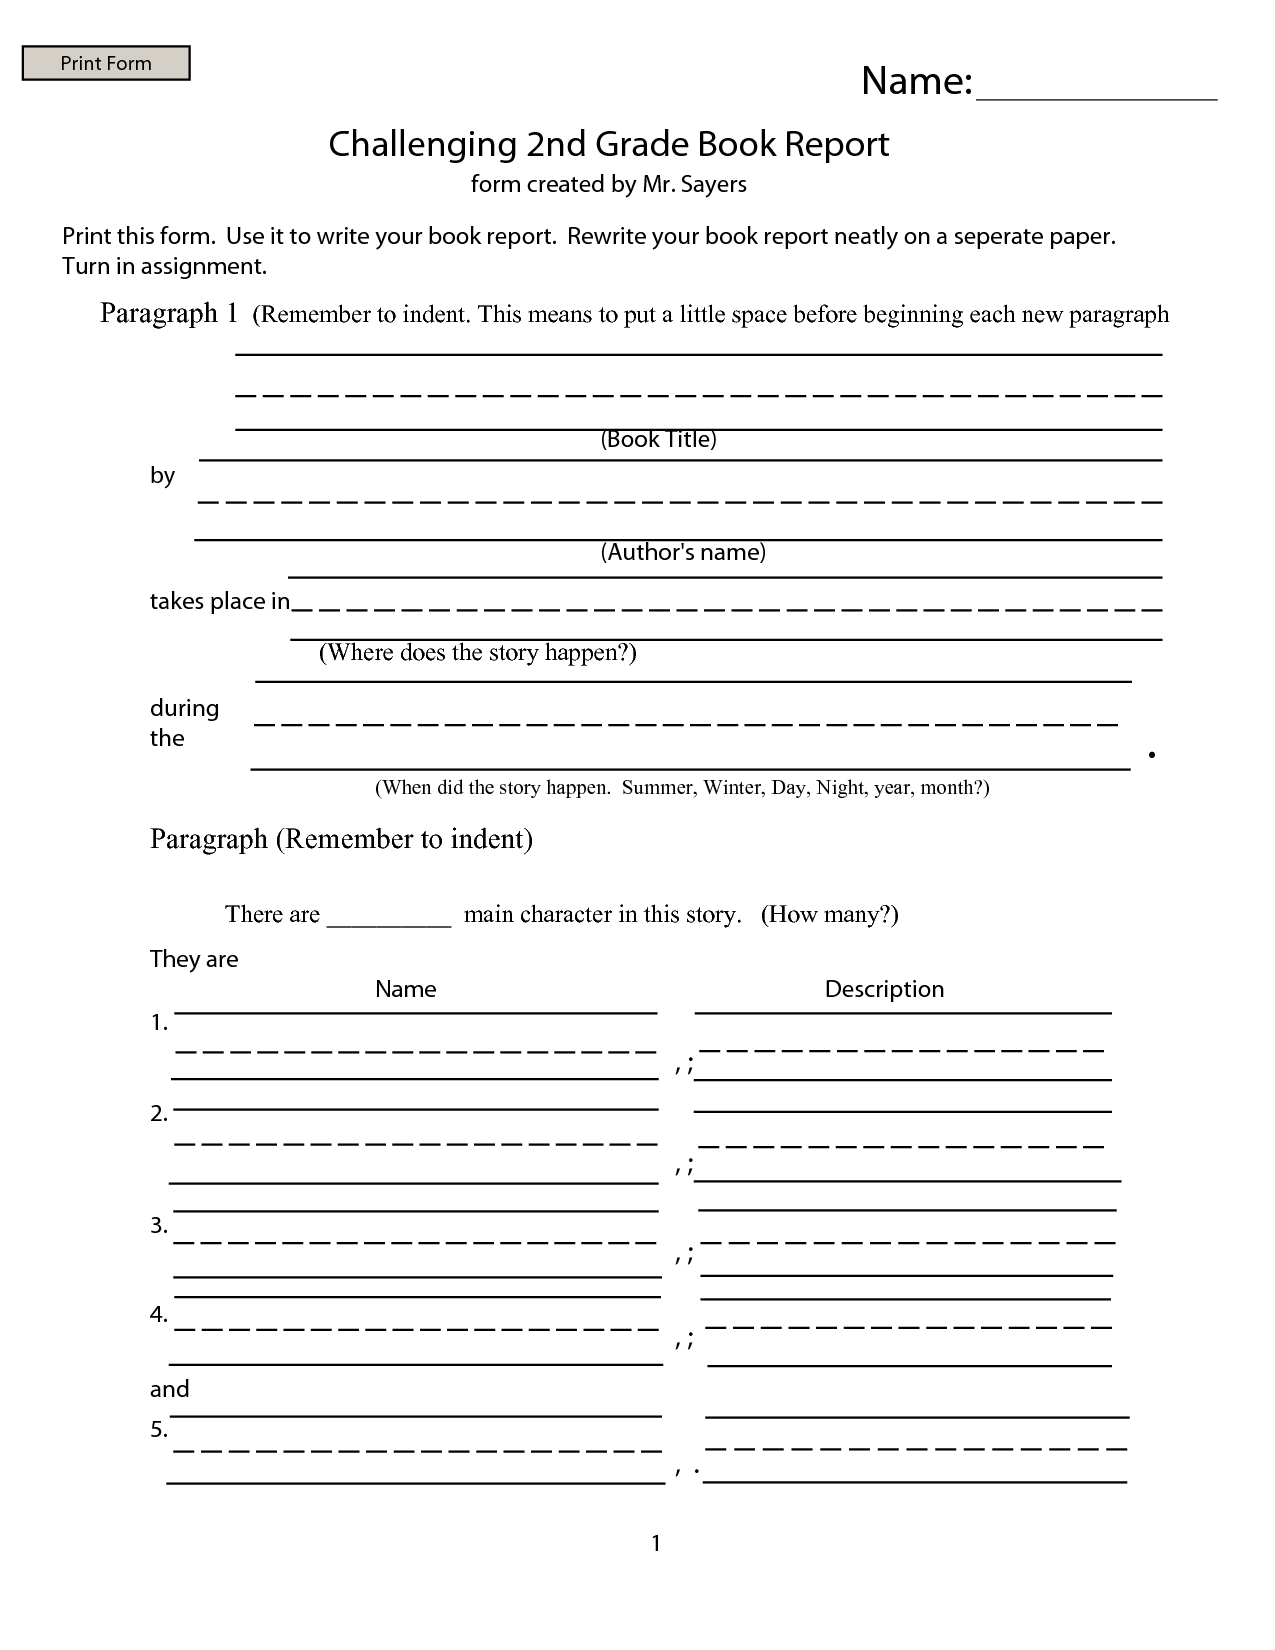 Worksheet Book Report | Printable Worksheets And Activities Within Book Report Template 2Nd Grade